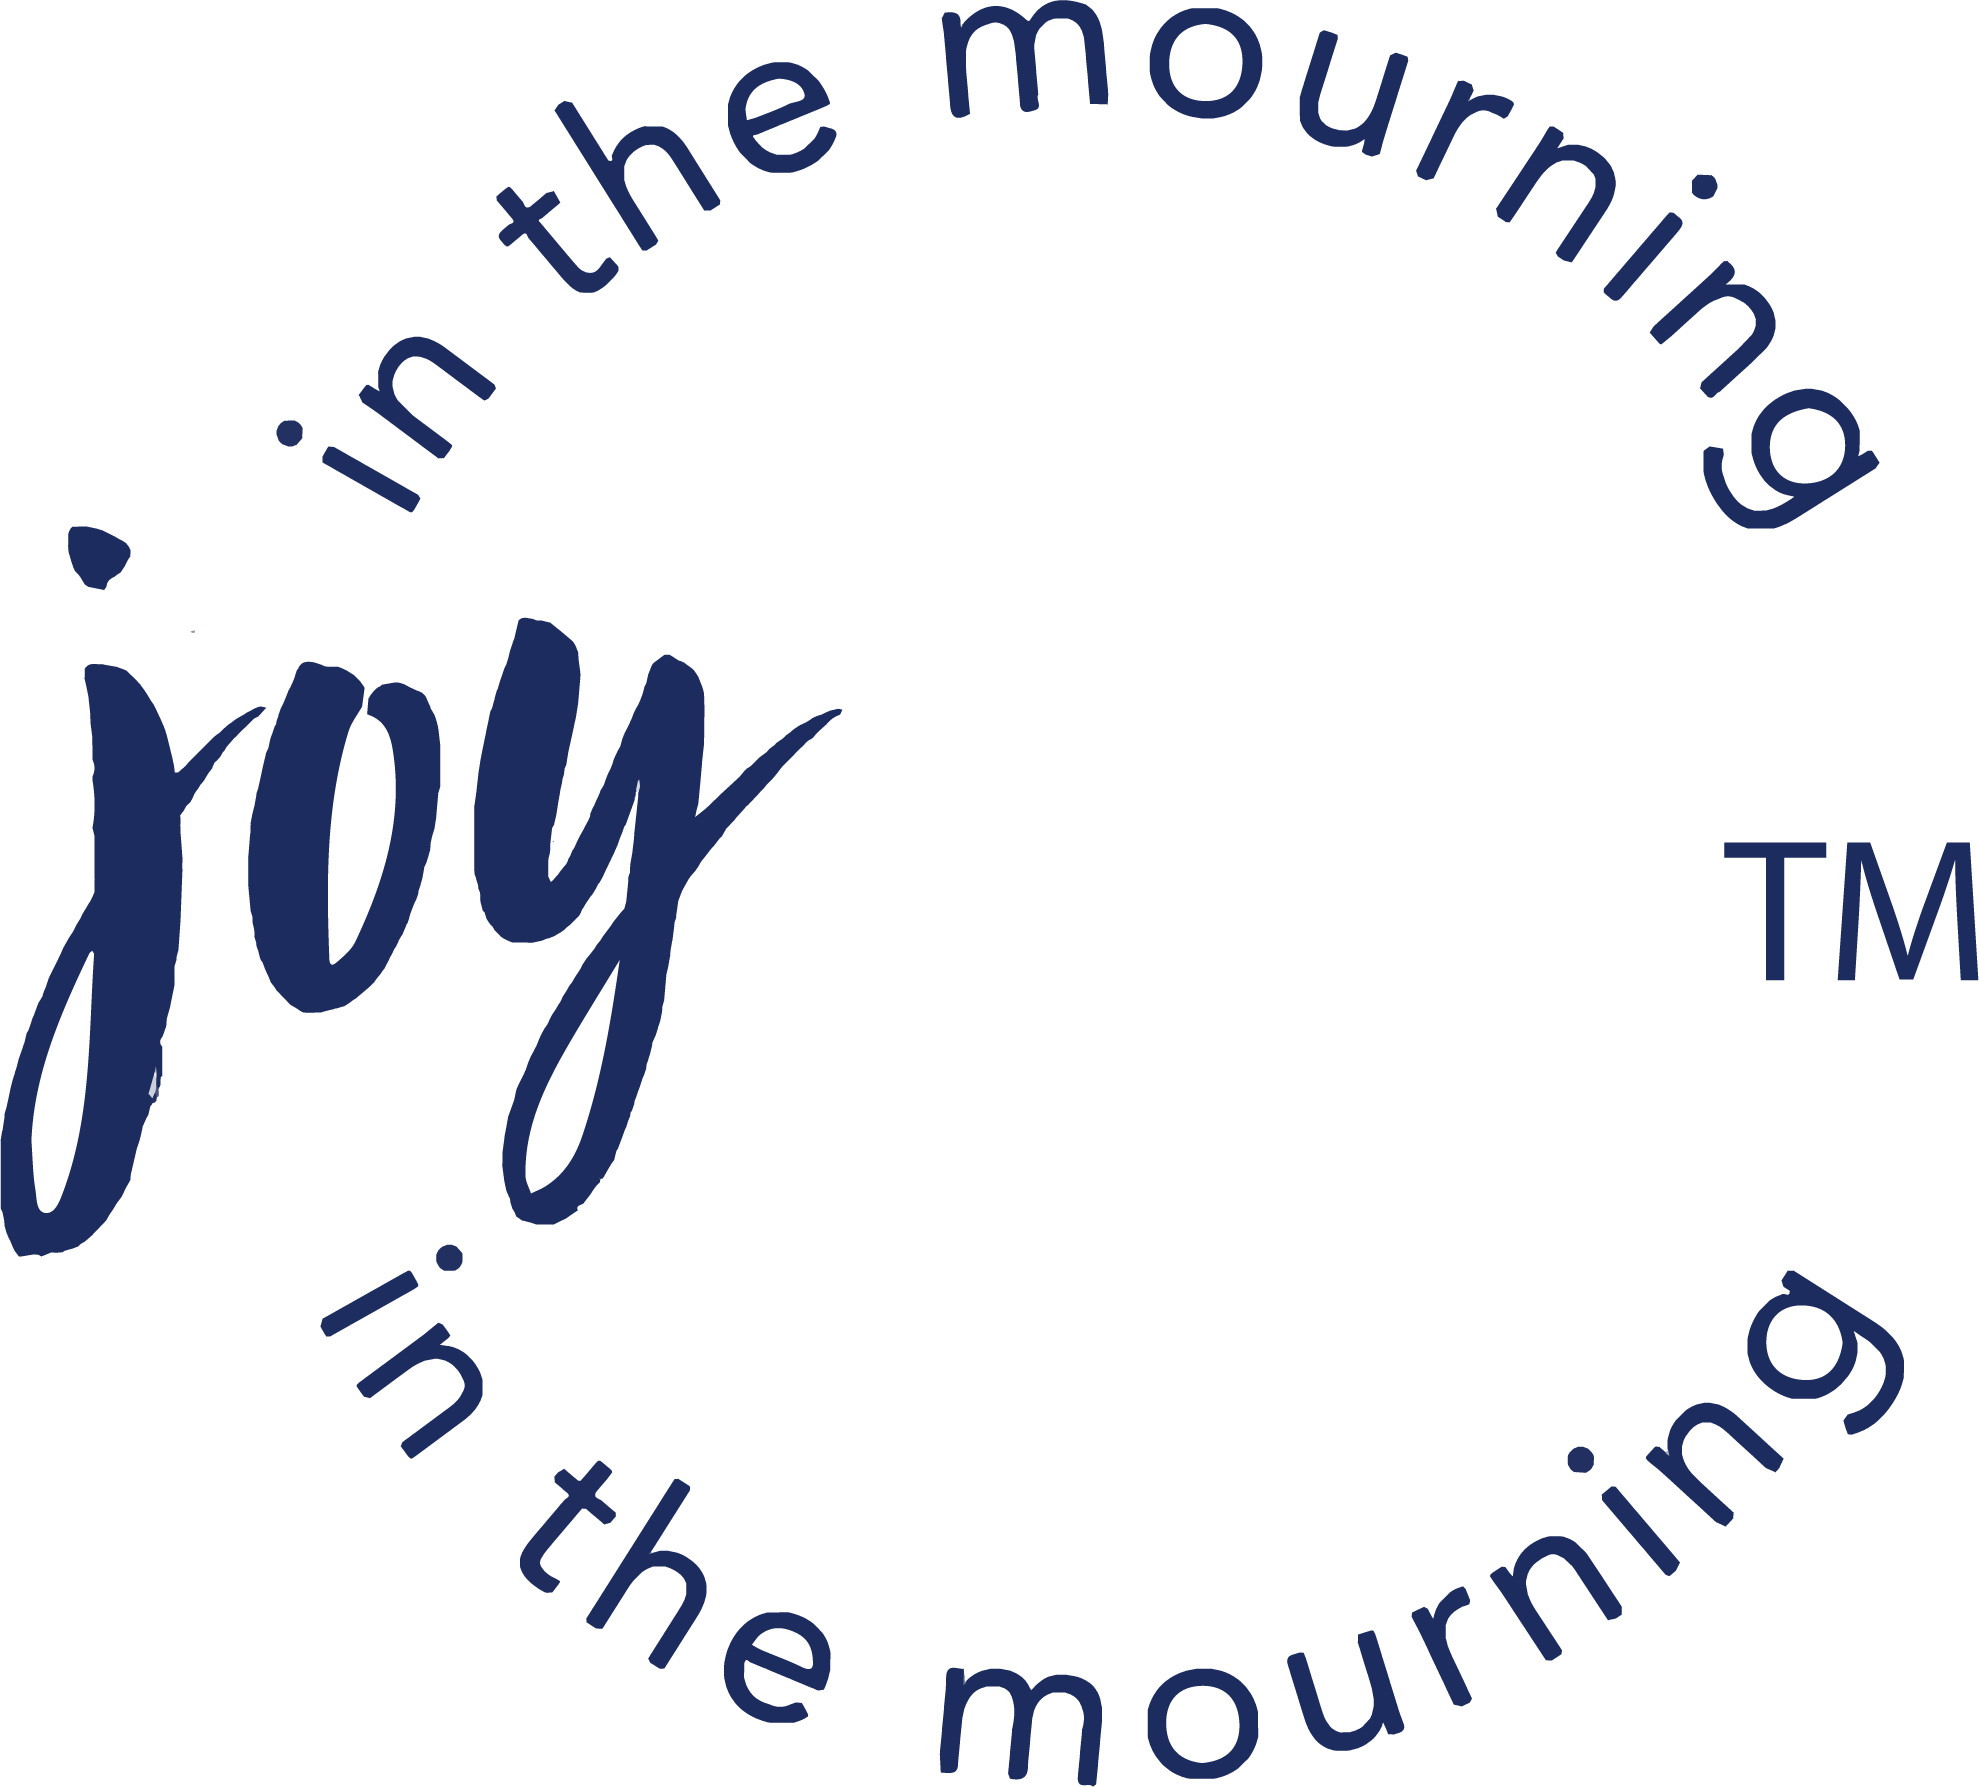 Joy in The Mourning